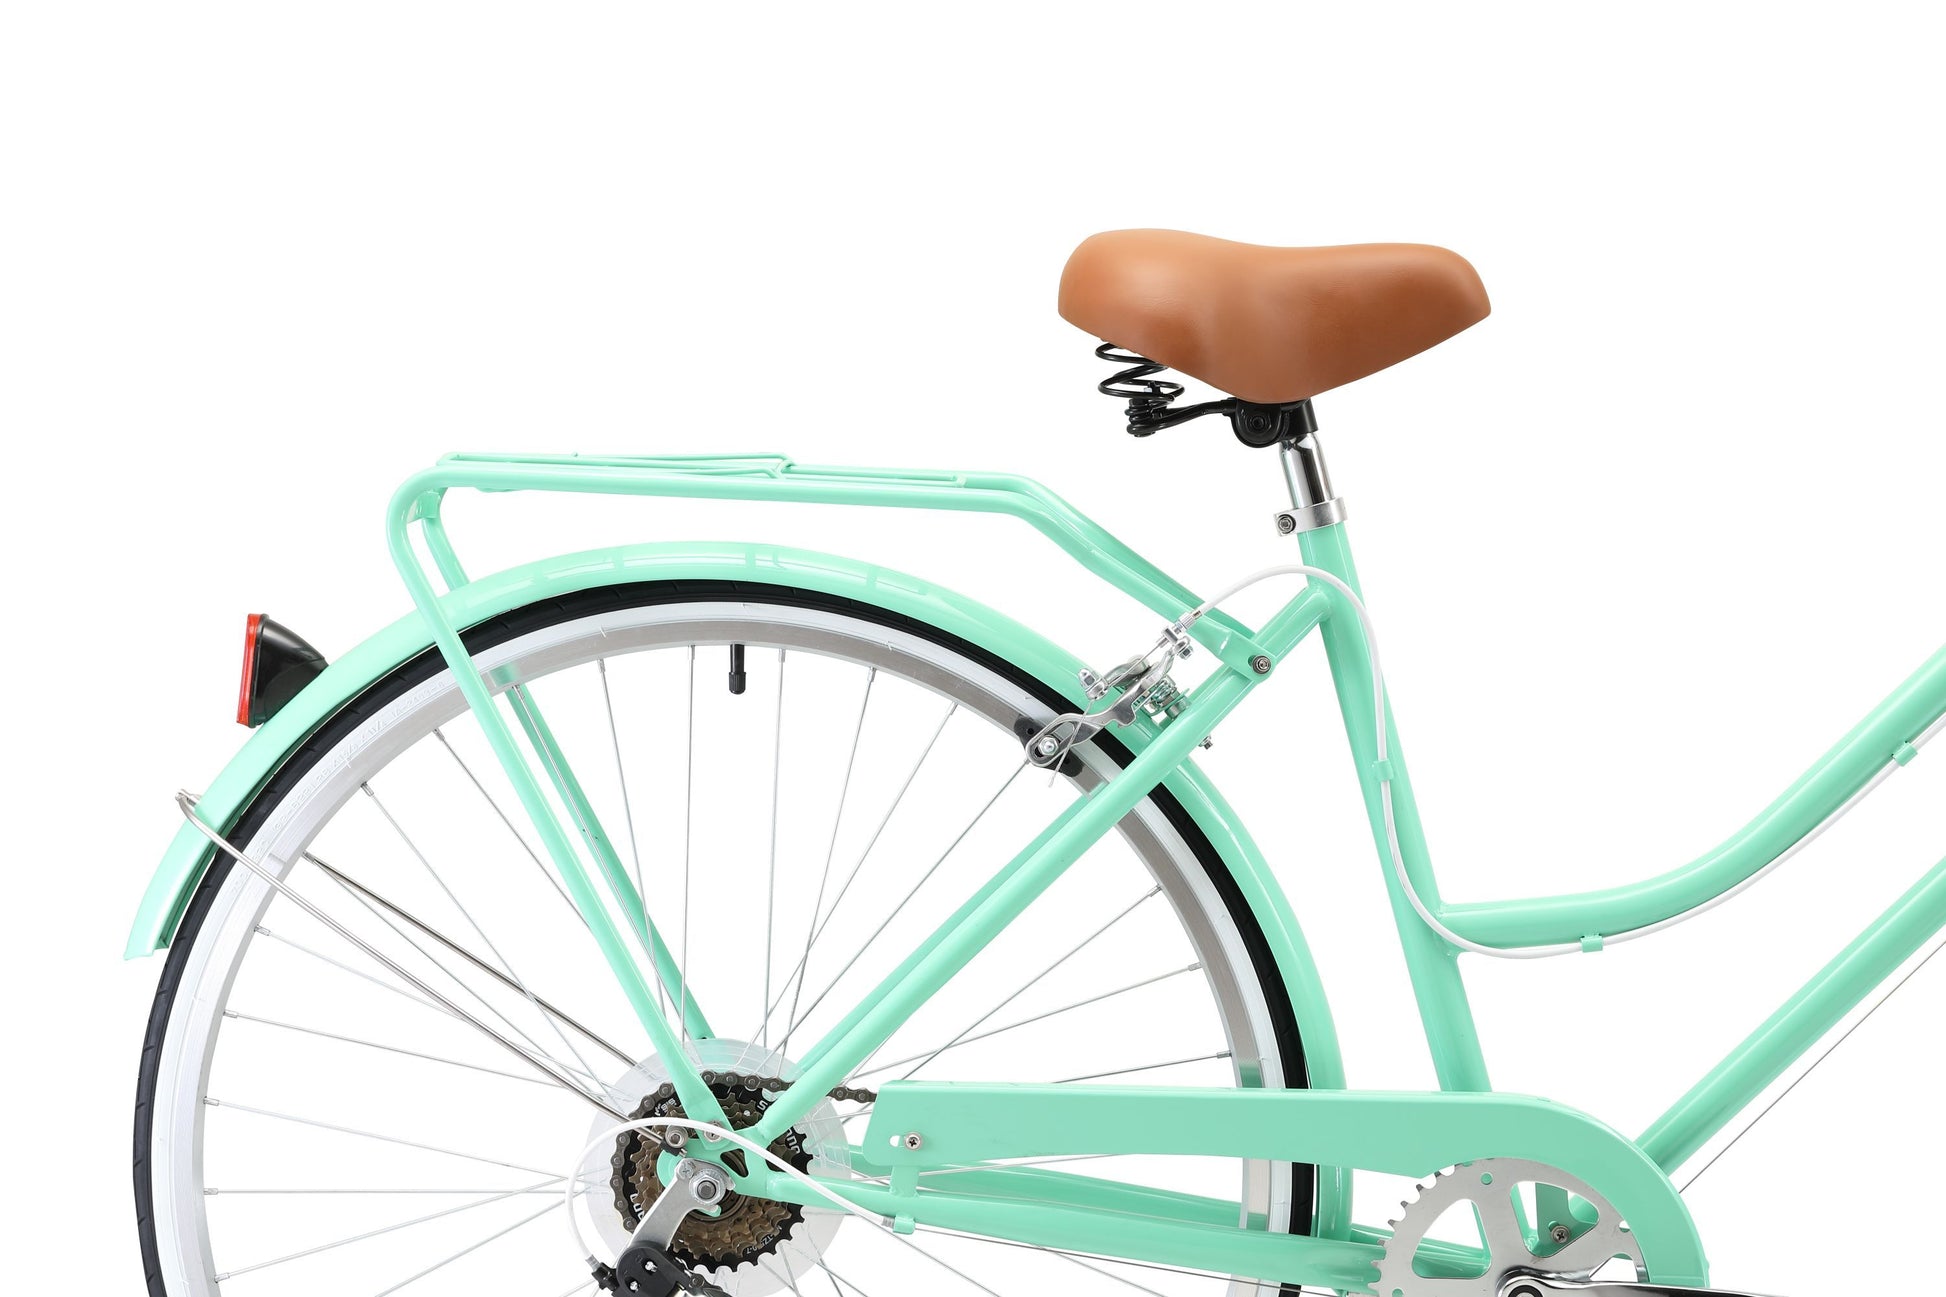 Ladies Classic Plus Vintage Bike in Mint Green showing rear pannier rack and comfortable saddle from Reid Cycles Australia